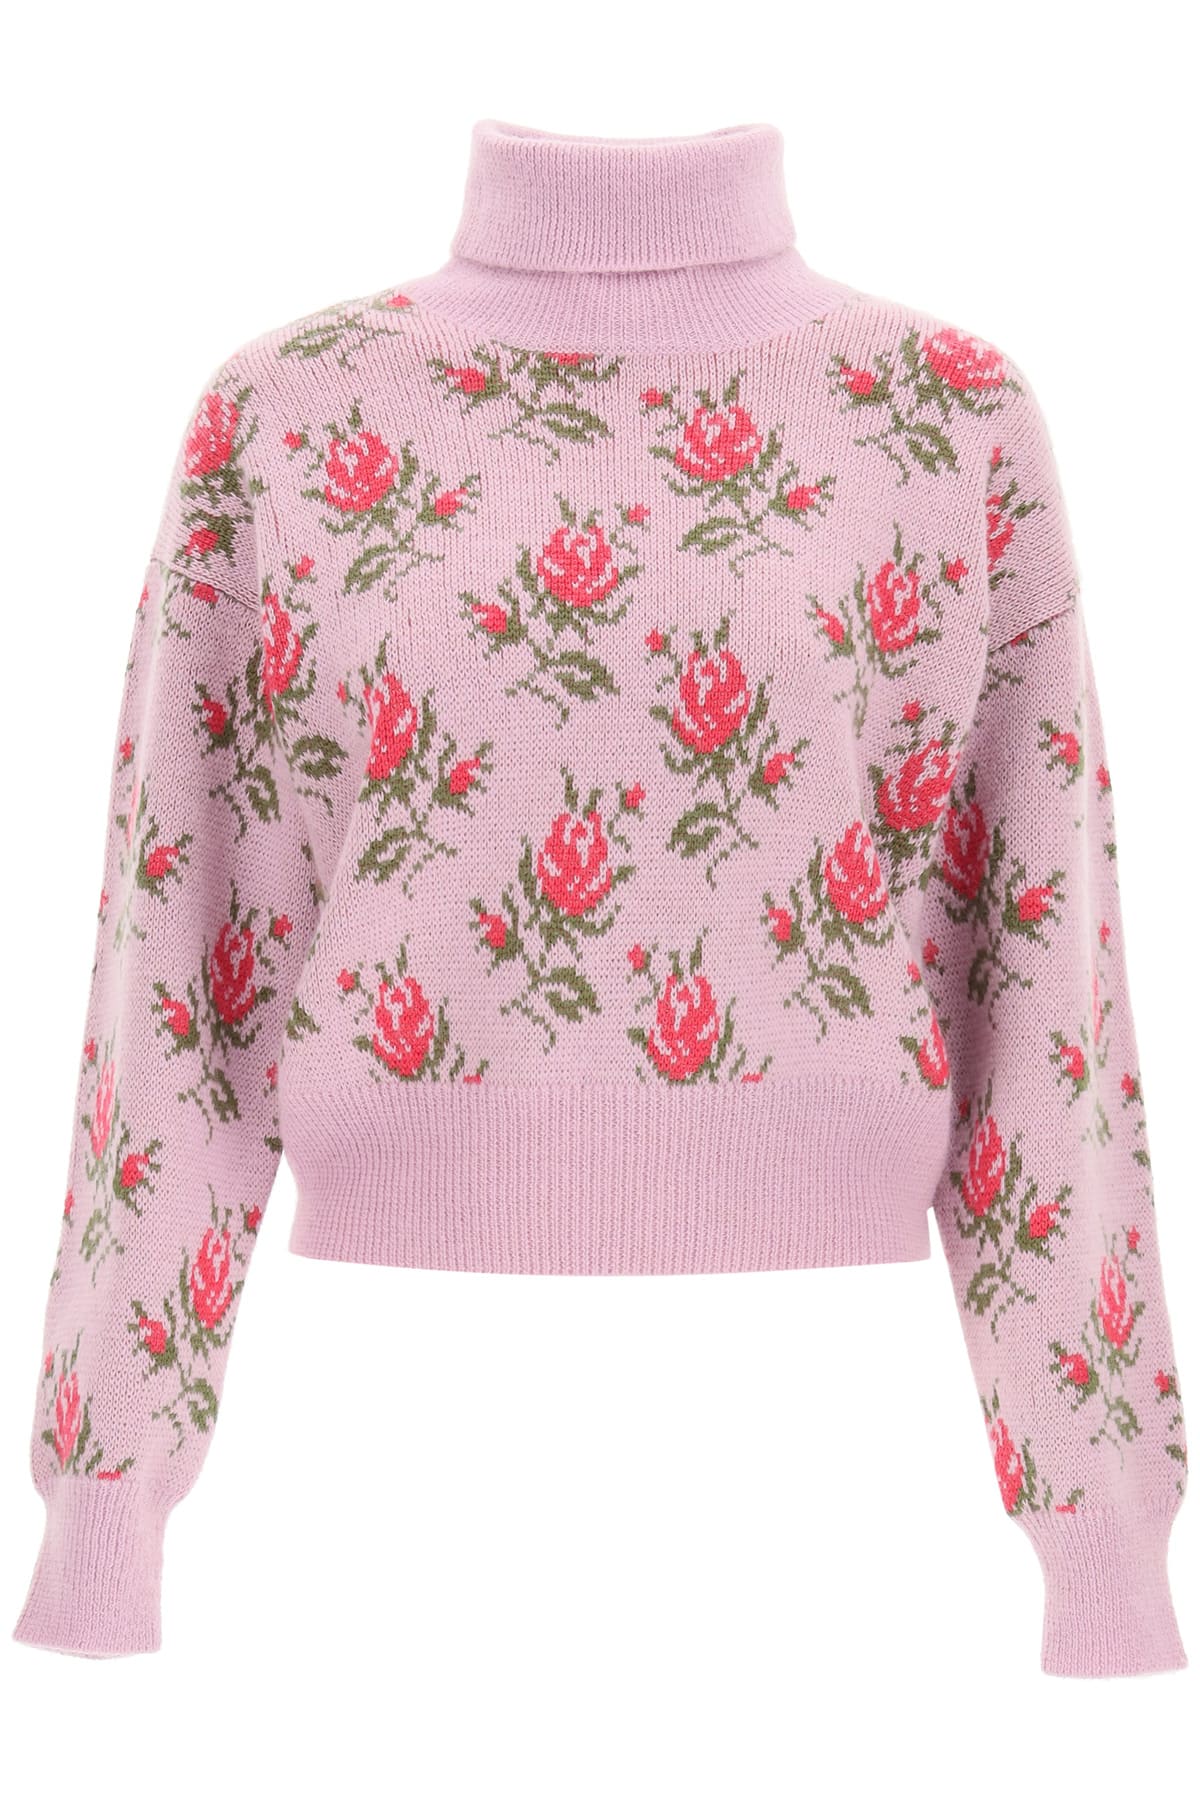 RED Valentino High Neck Sweater With Jacquard Flowers